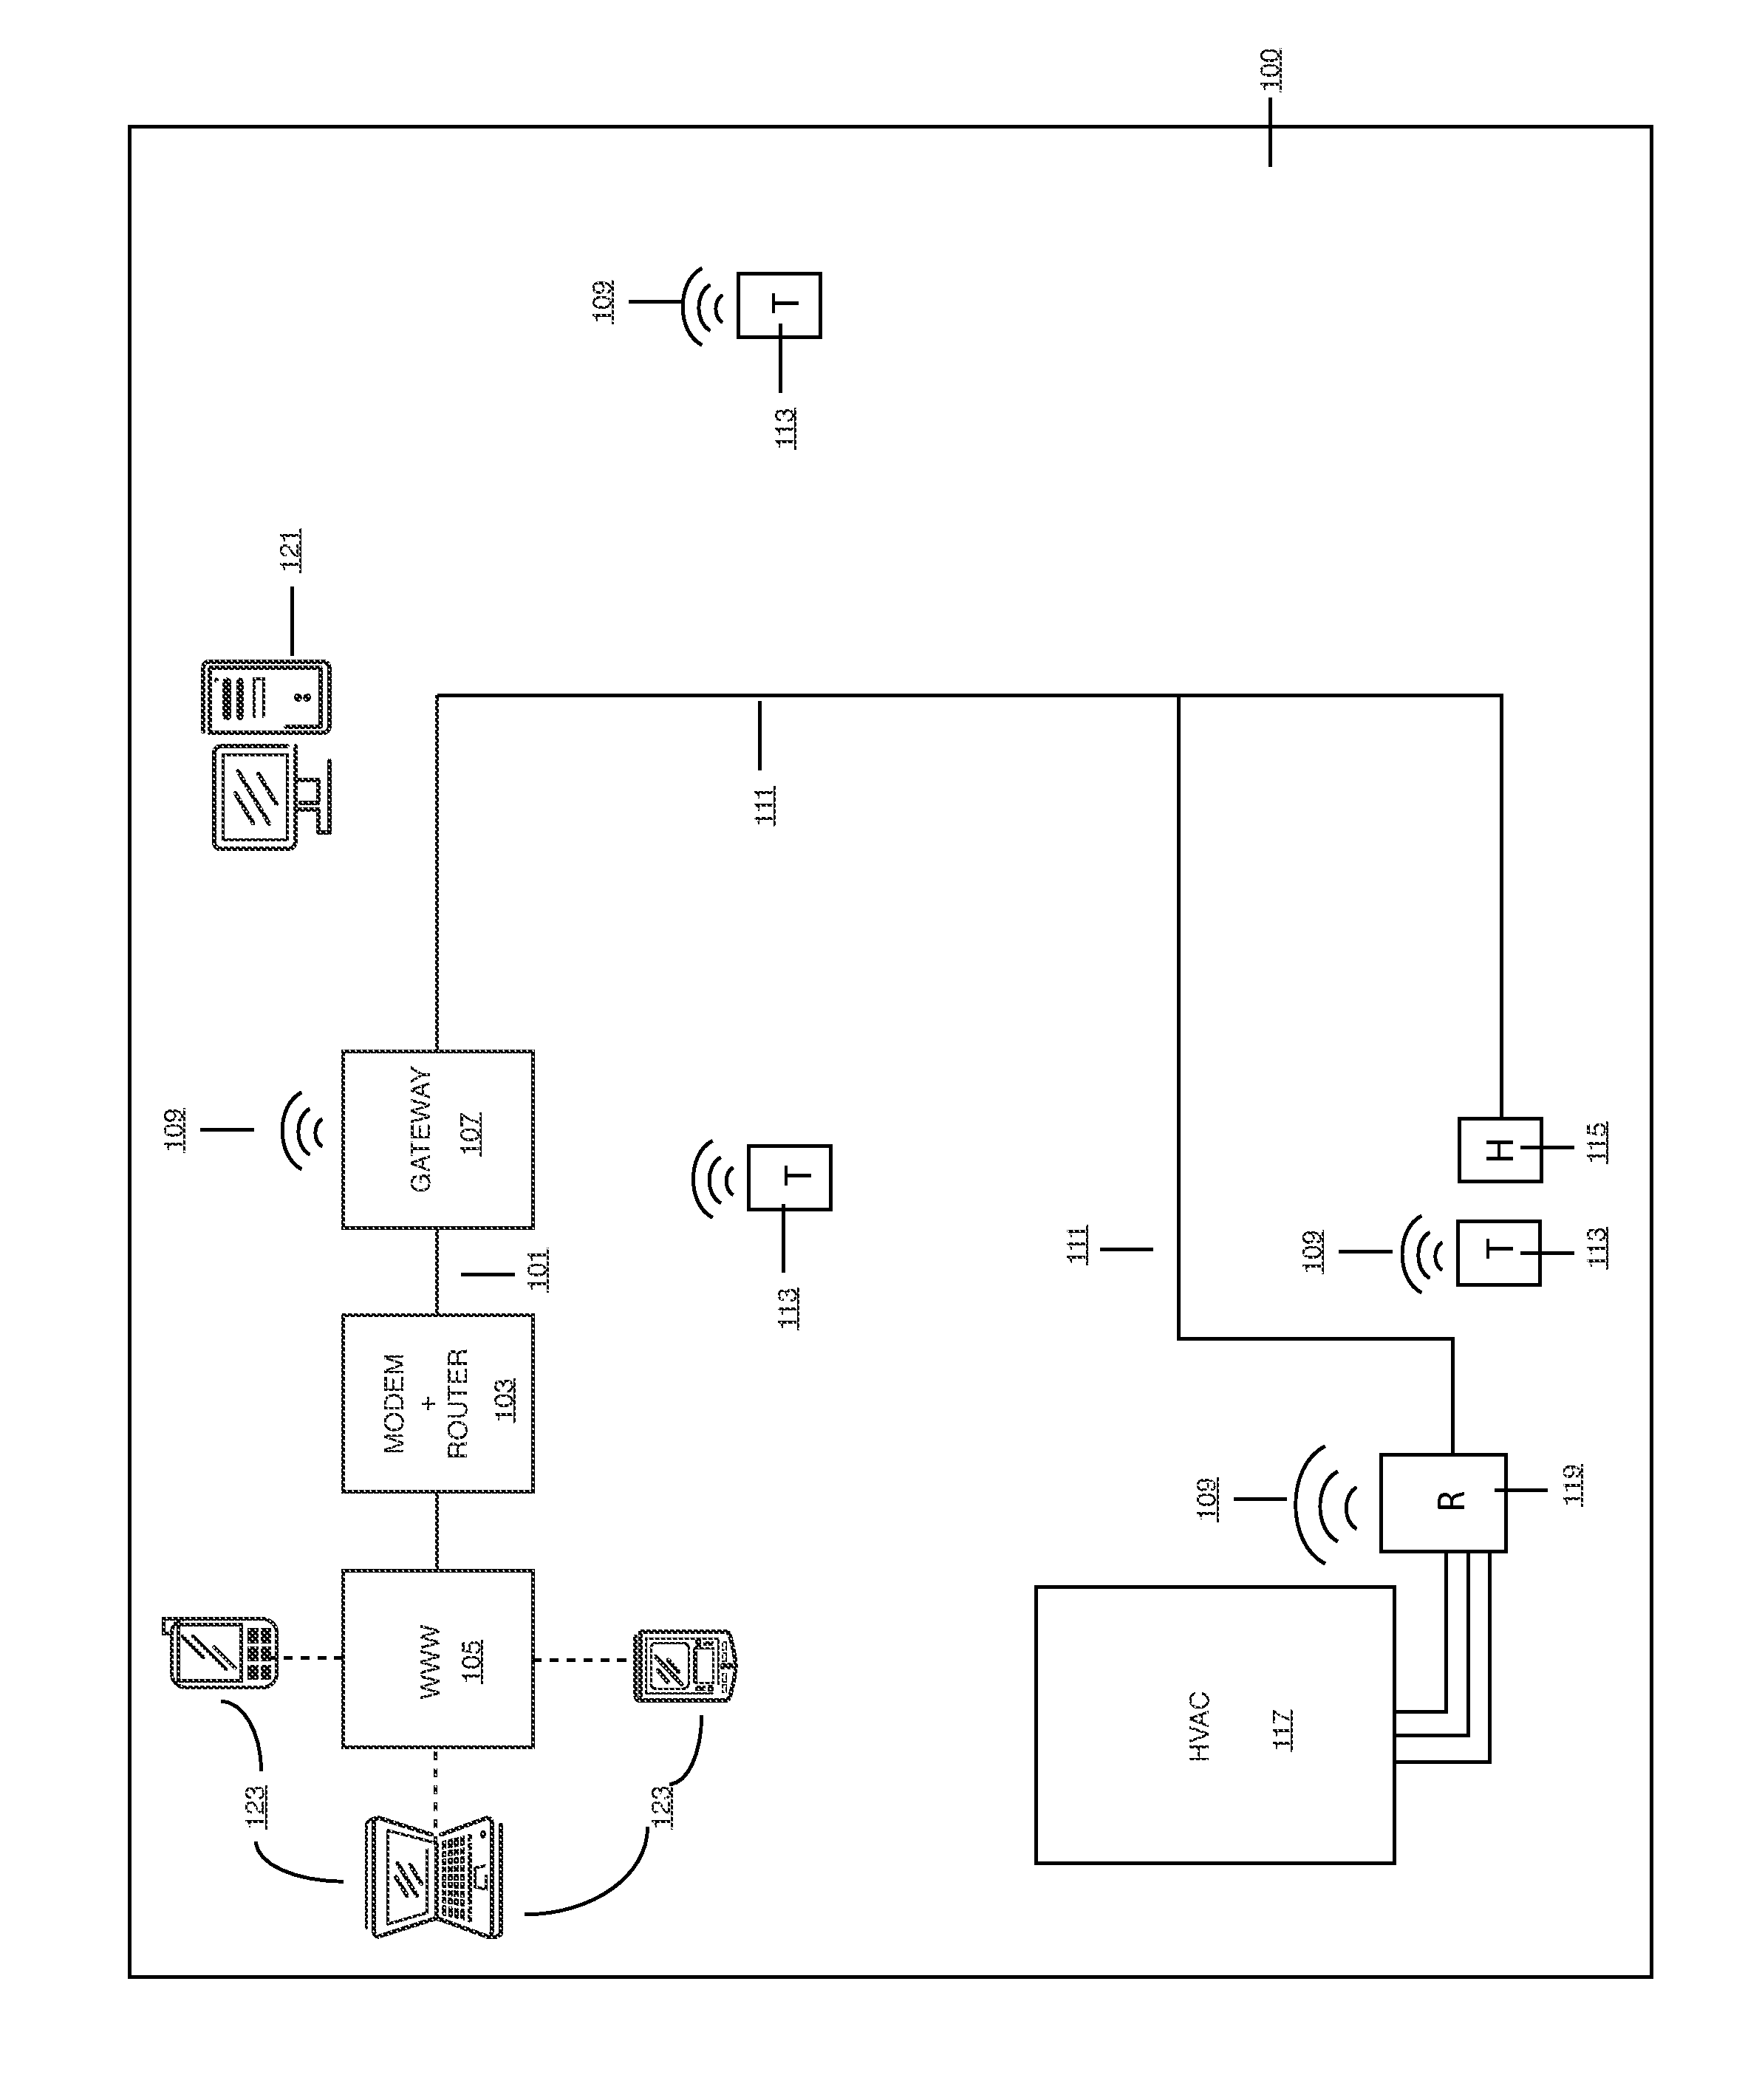 System for using a plurality of remote sensing devices for energy management